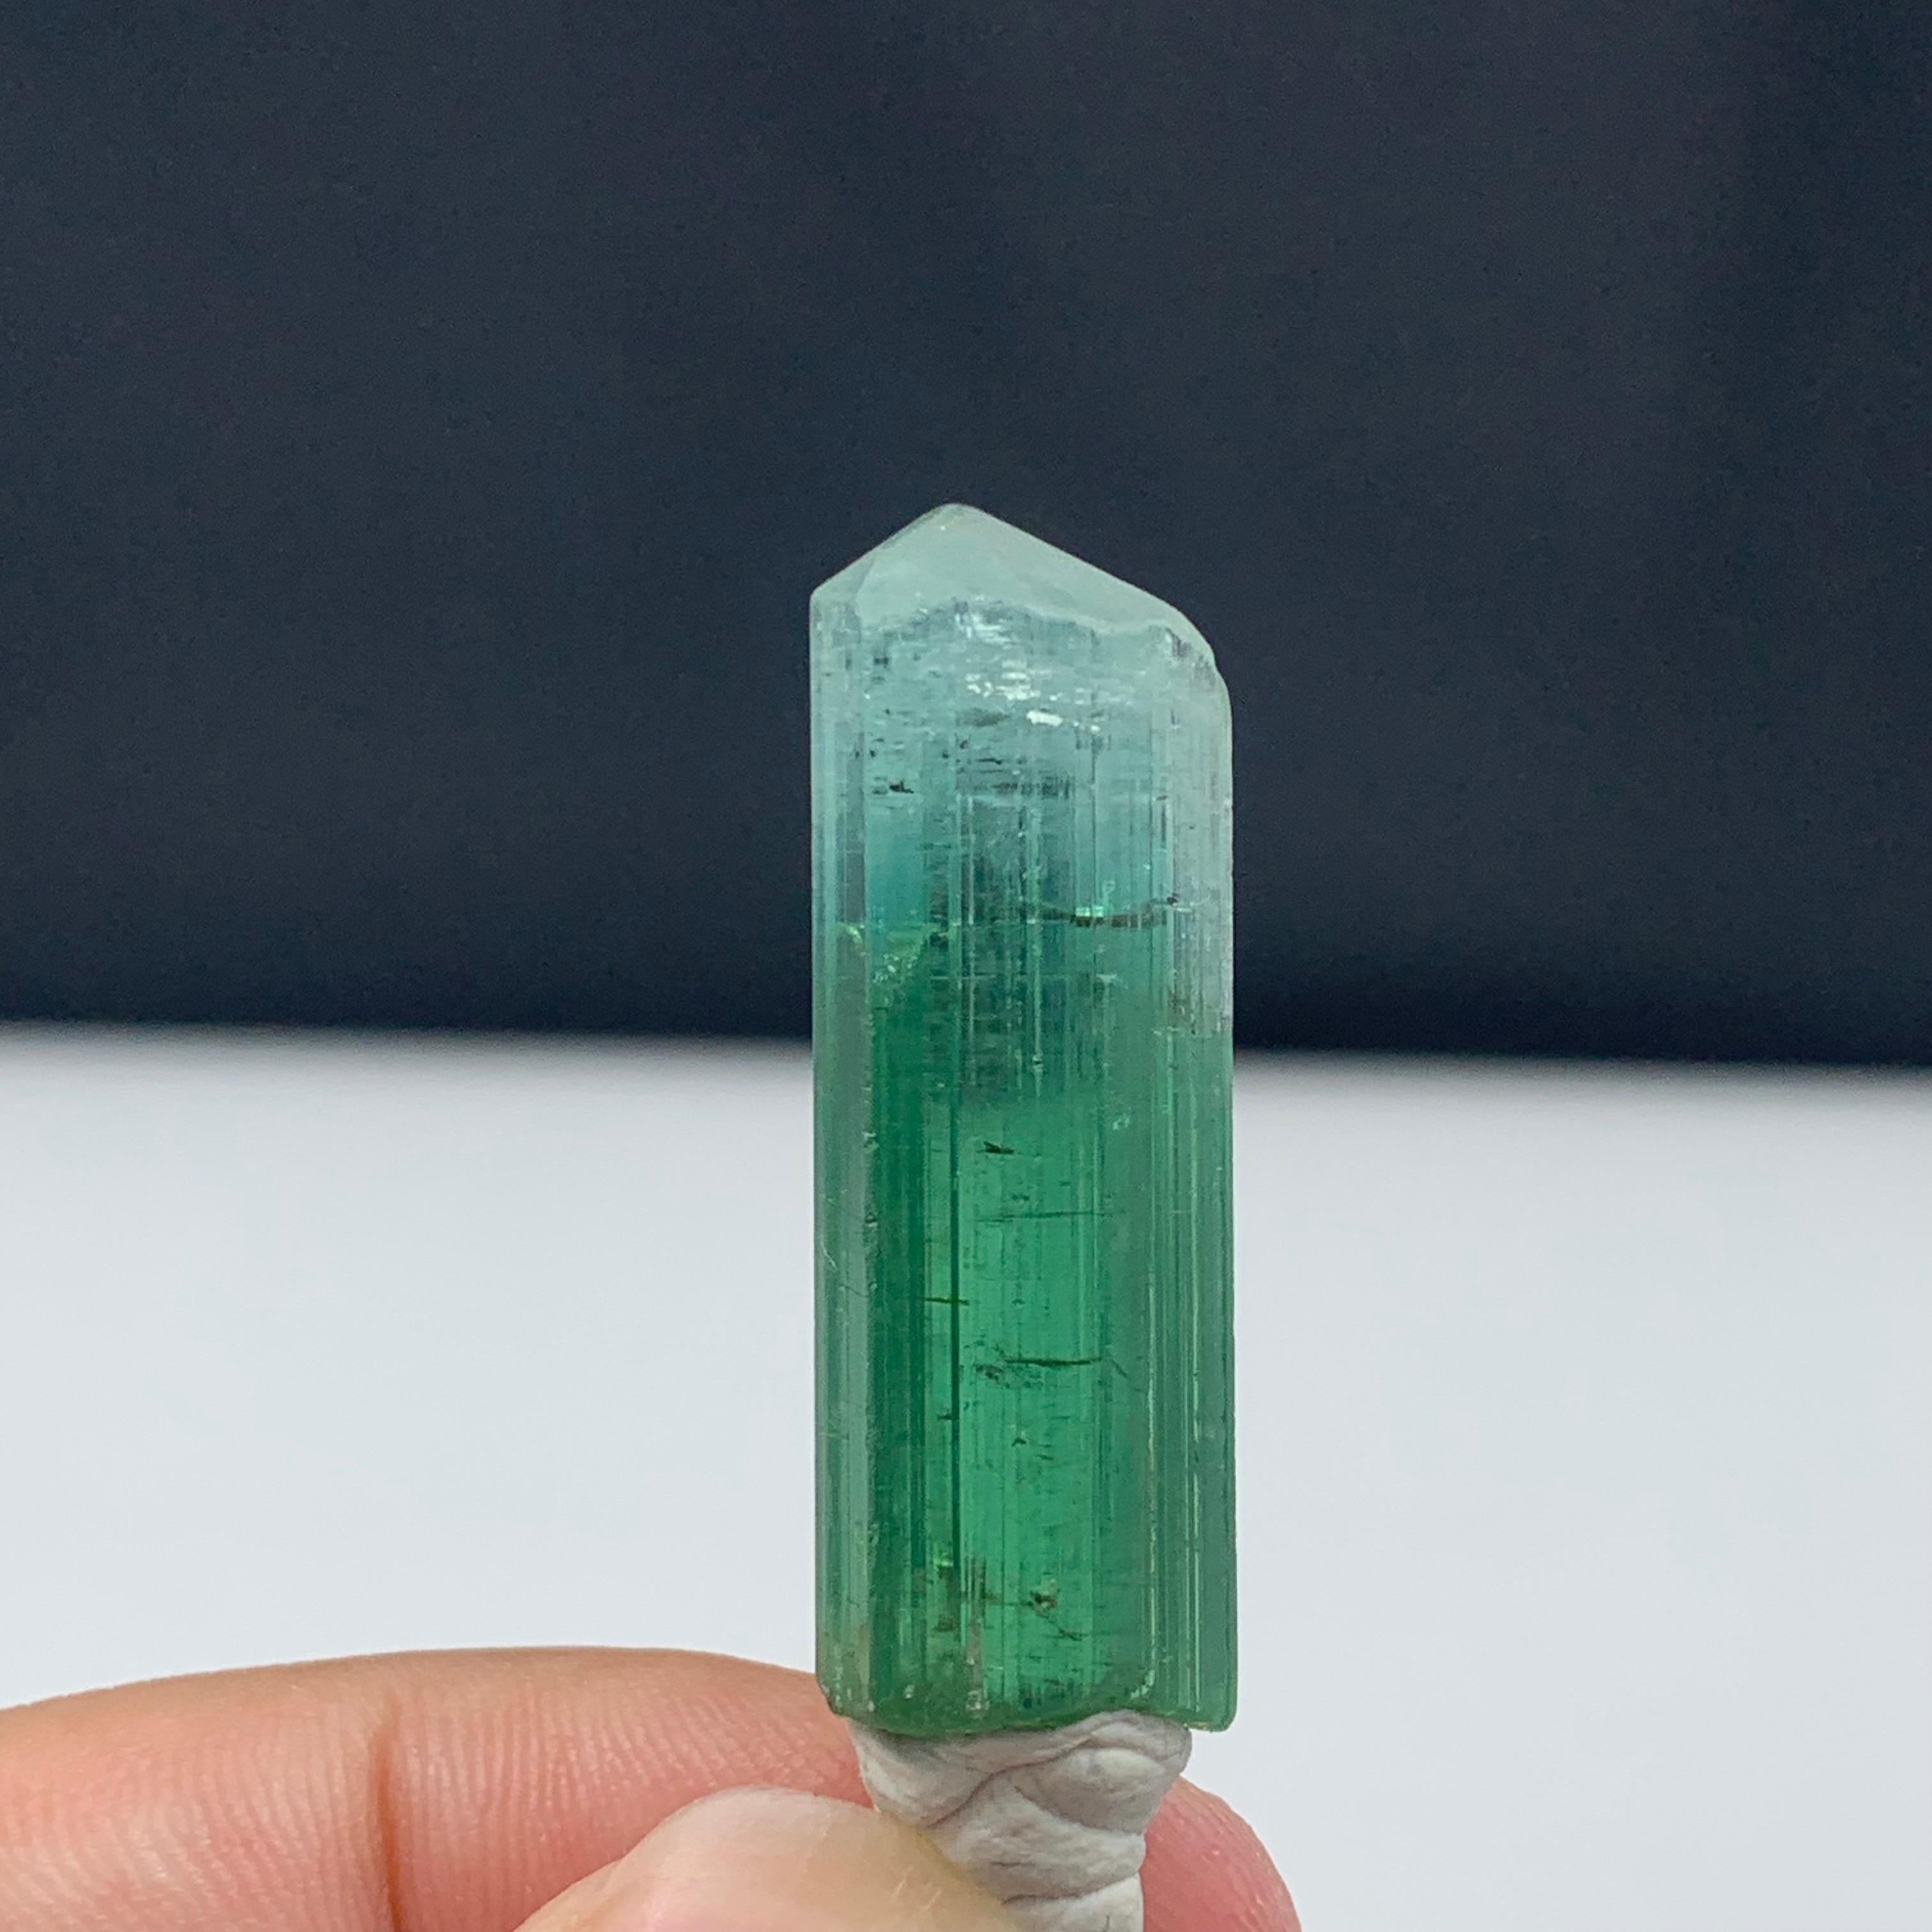 Attractive Bi-Color Tourmaline Crystal from Kunar, Afghanistan
WEIGHT: 39.70 Carat
DIMENSIONS: 3.3 x 1.2 x 1 Cm
ORIGIN: Kunar, Afghanistan
COLOR: Mint Green and Green
TREATMENT: None
Tourmaline is an extremely popular gemstone; the name